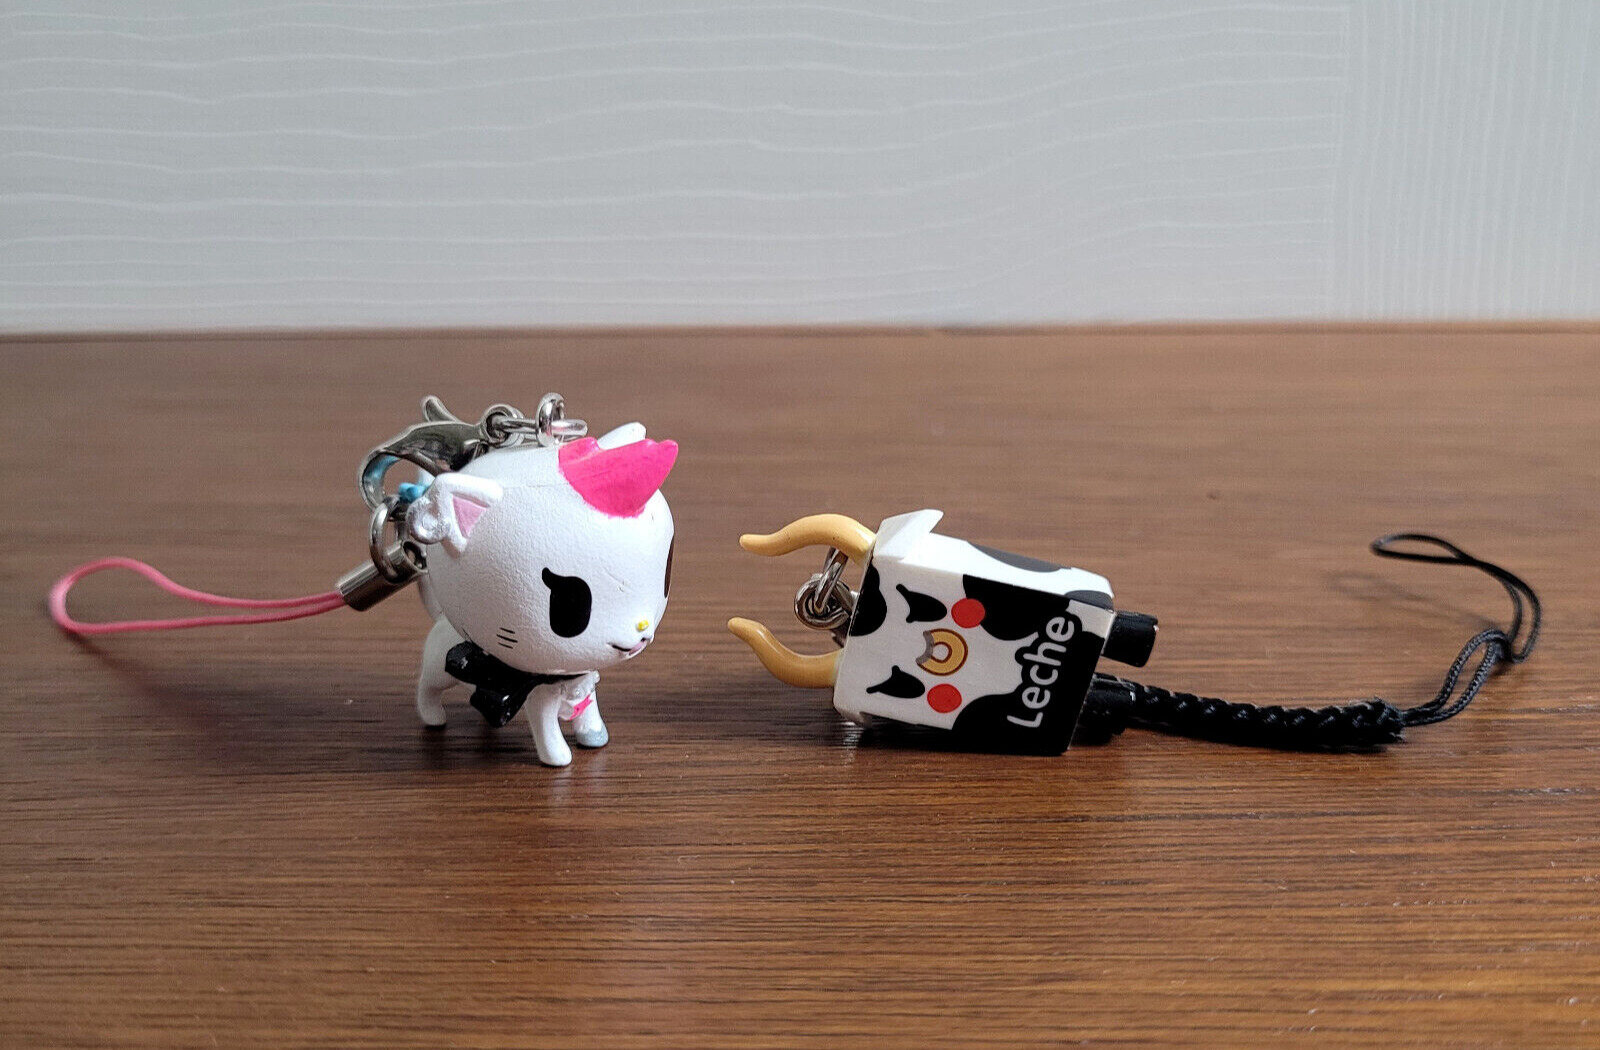 tokidoki-charm-maintenance-tips-on-cleaning-and-caring-for-your-tokidoki-phone-charms